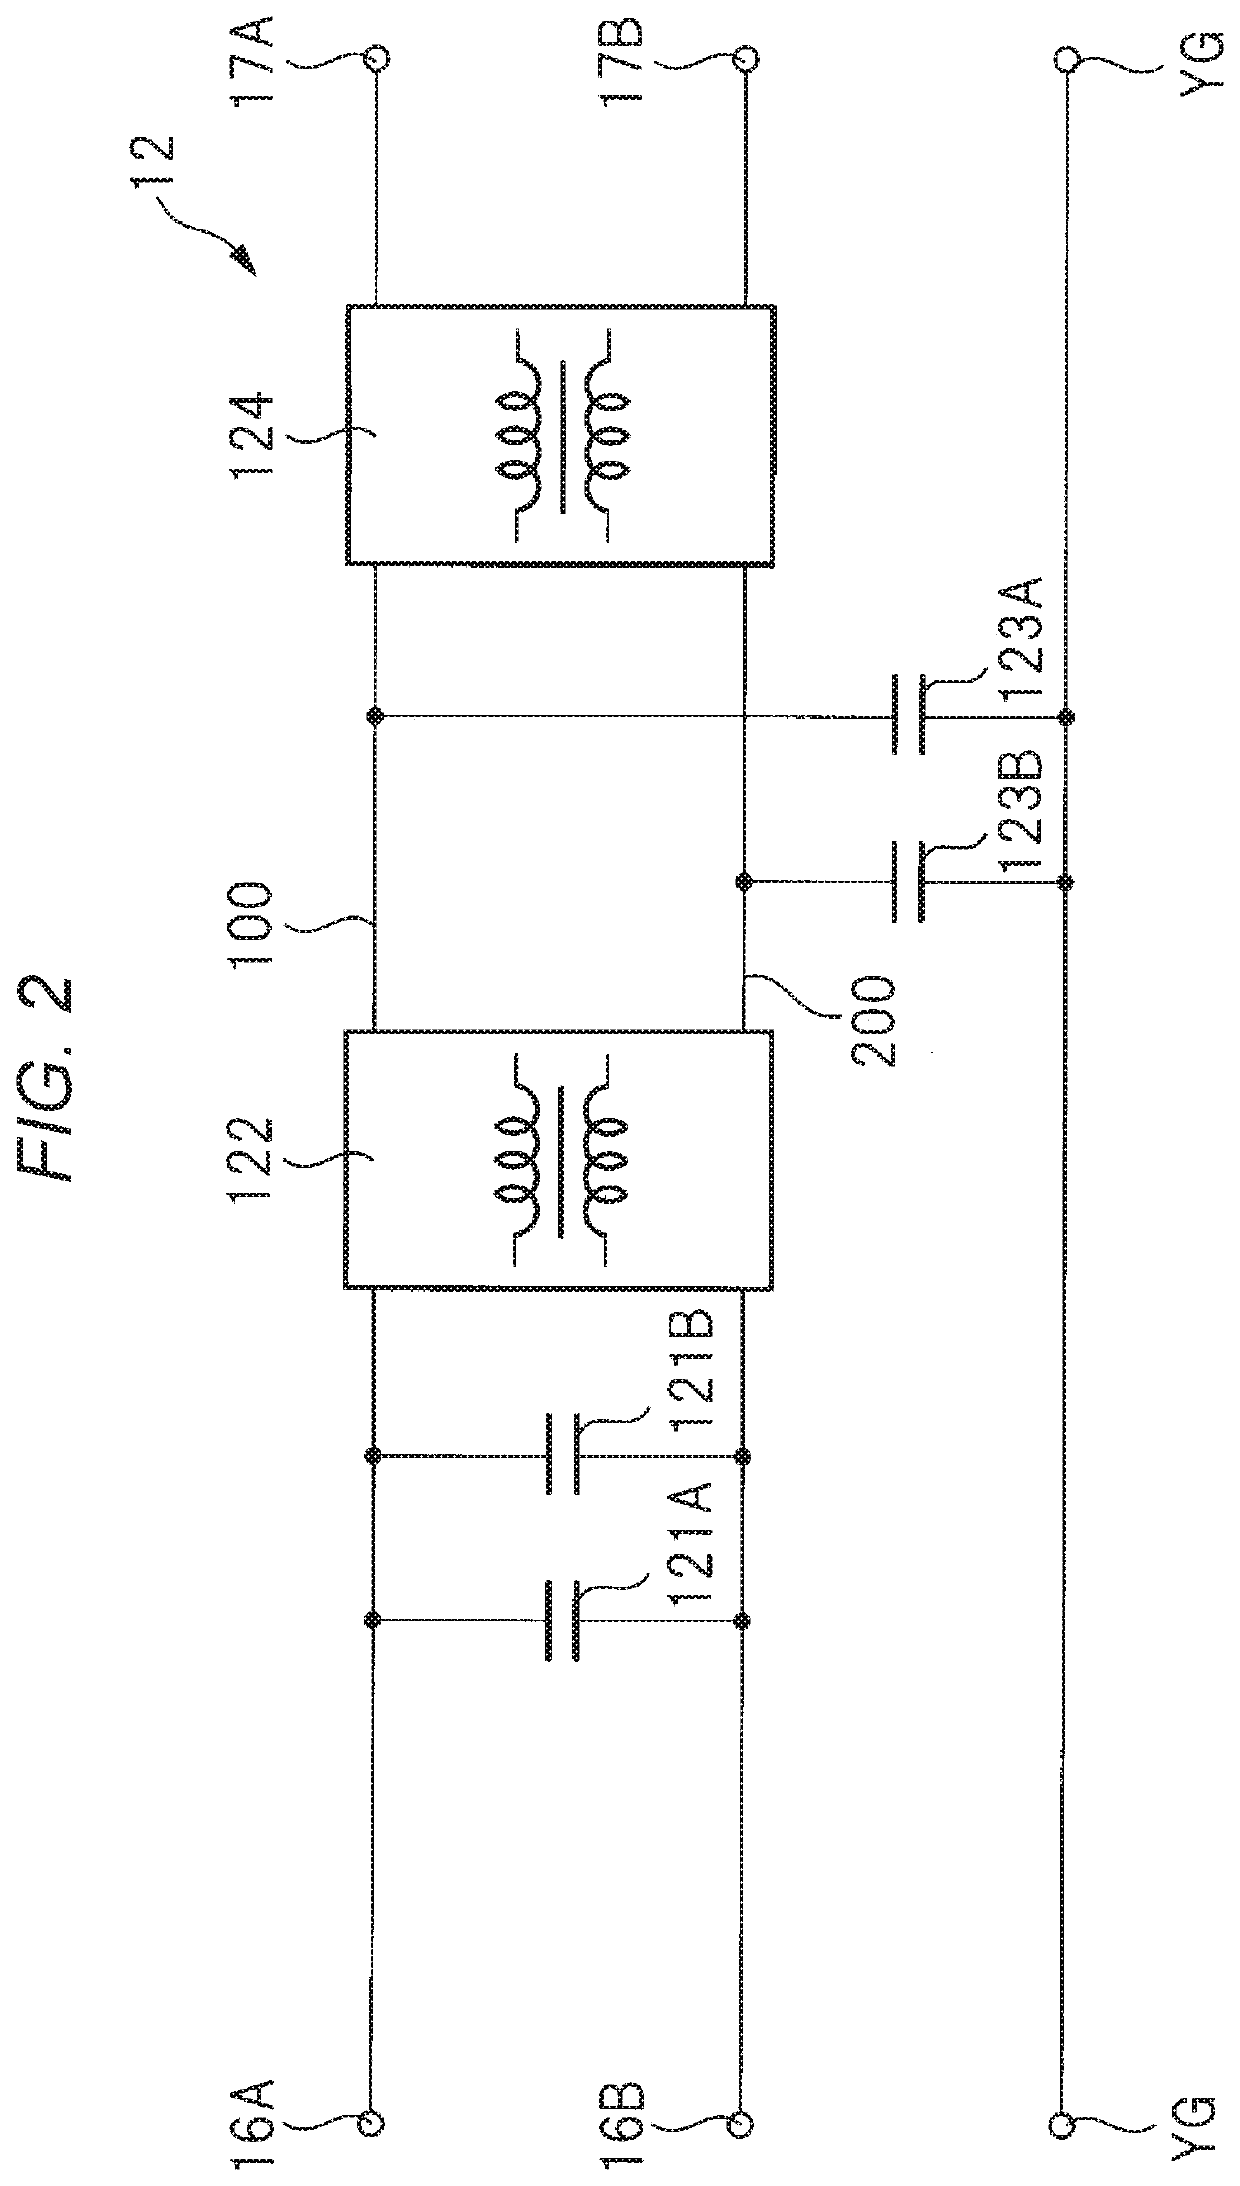 Voltage filter and power conversion device